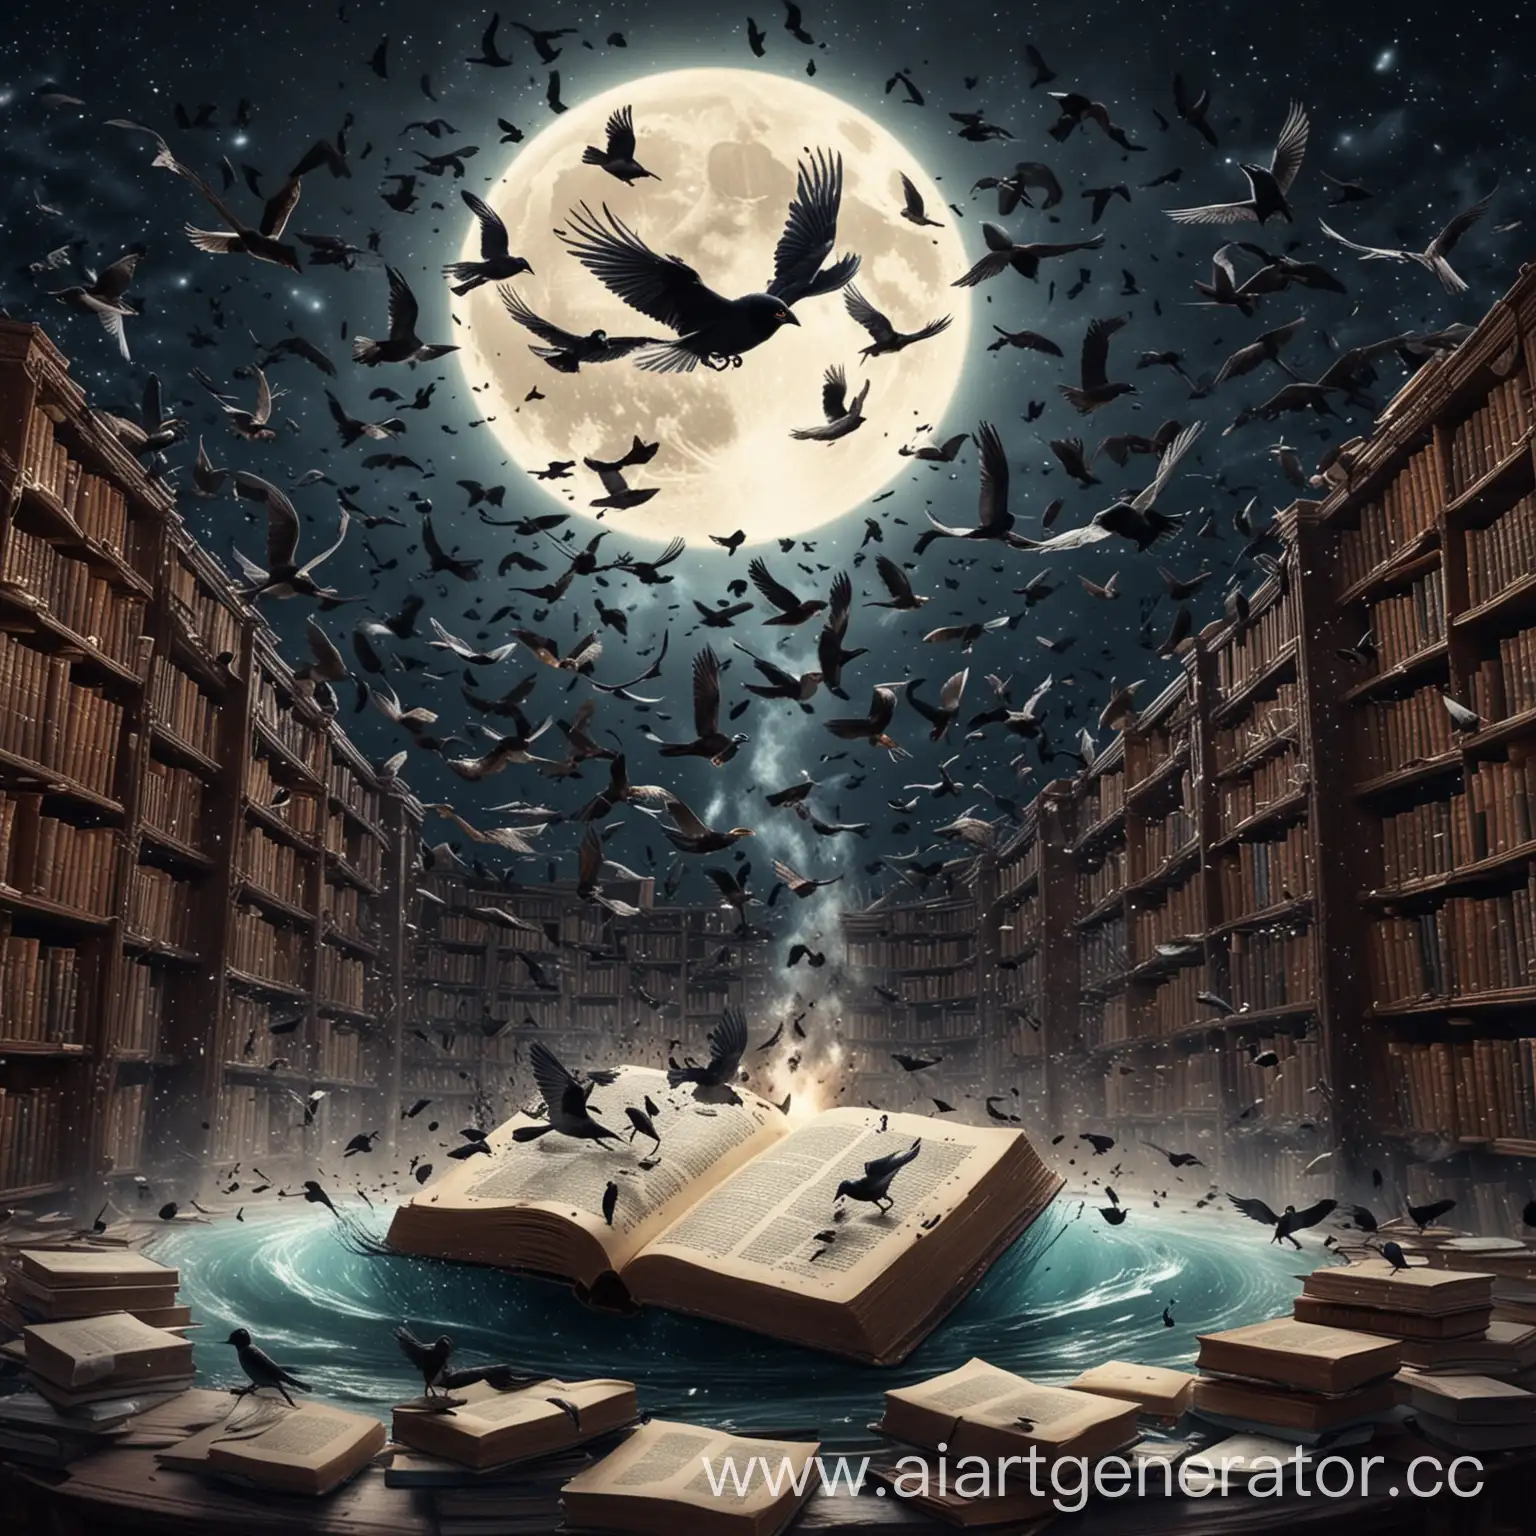 Enchanted-Library-at-Night-Creatures-Emerged-from-Books-Amidst-Moonlit-Chaos